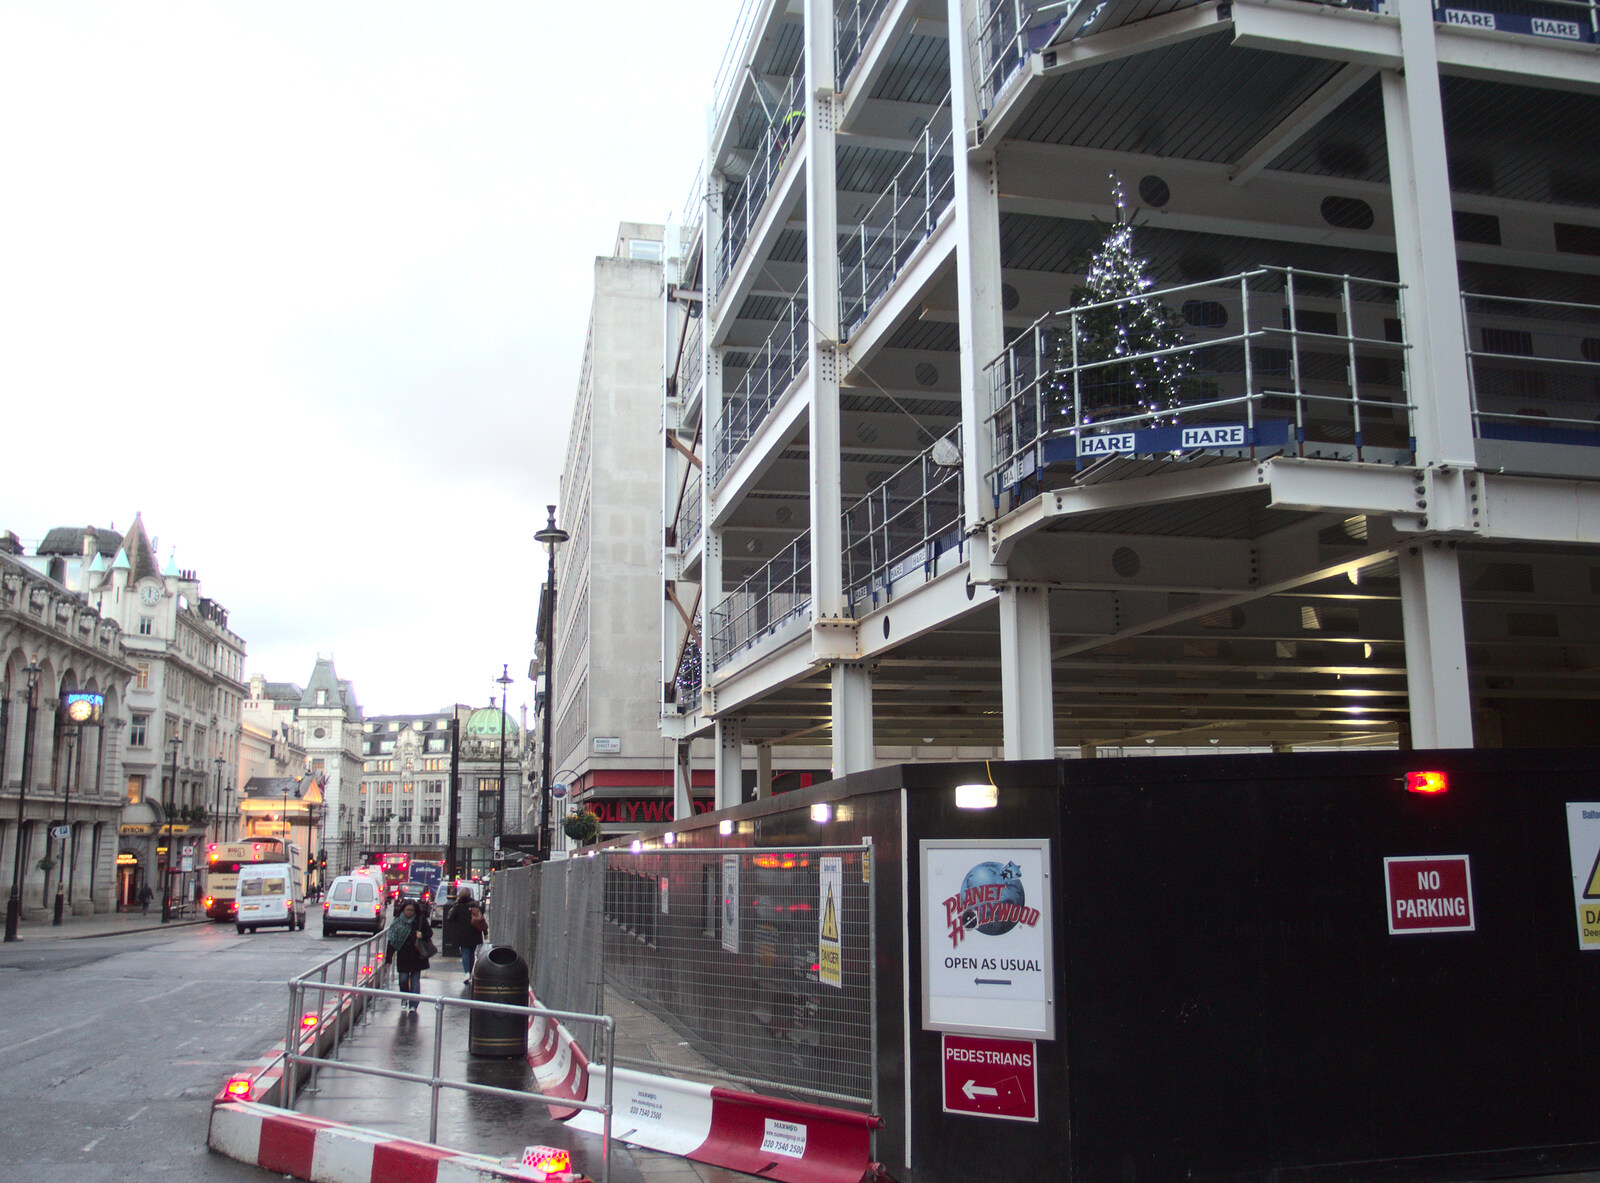 New construction near Picadilly Circus from SwiftKey Innovation Nights, Westminster, London - 19th December 2014